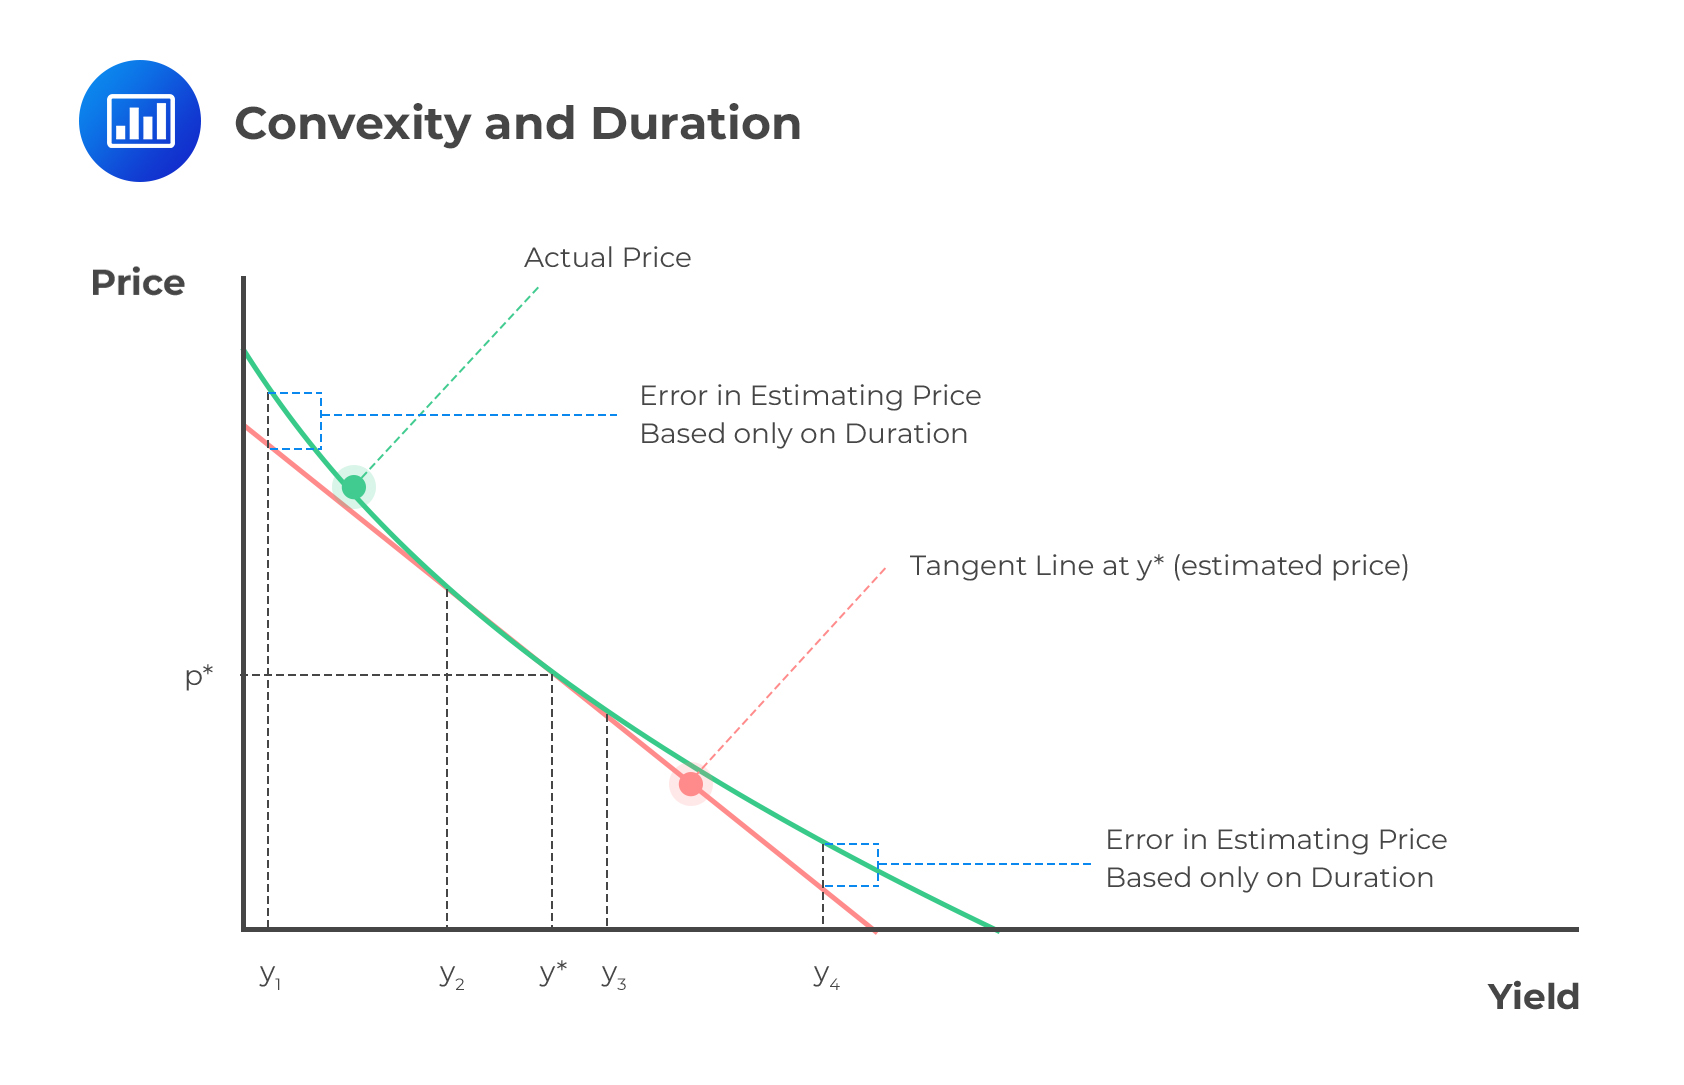 Convexity and Duration